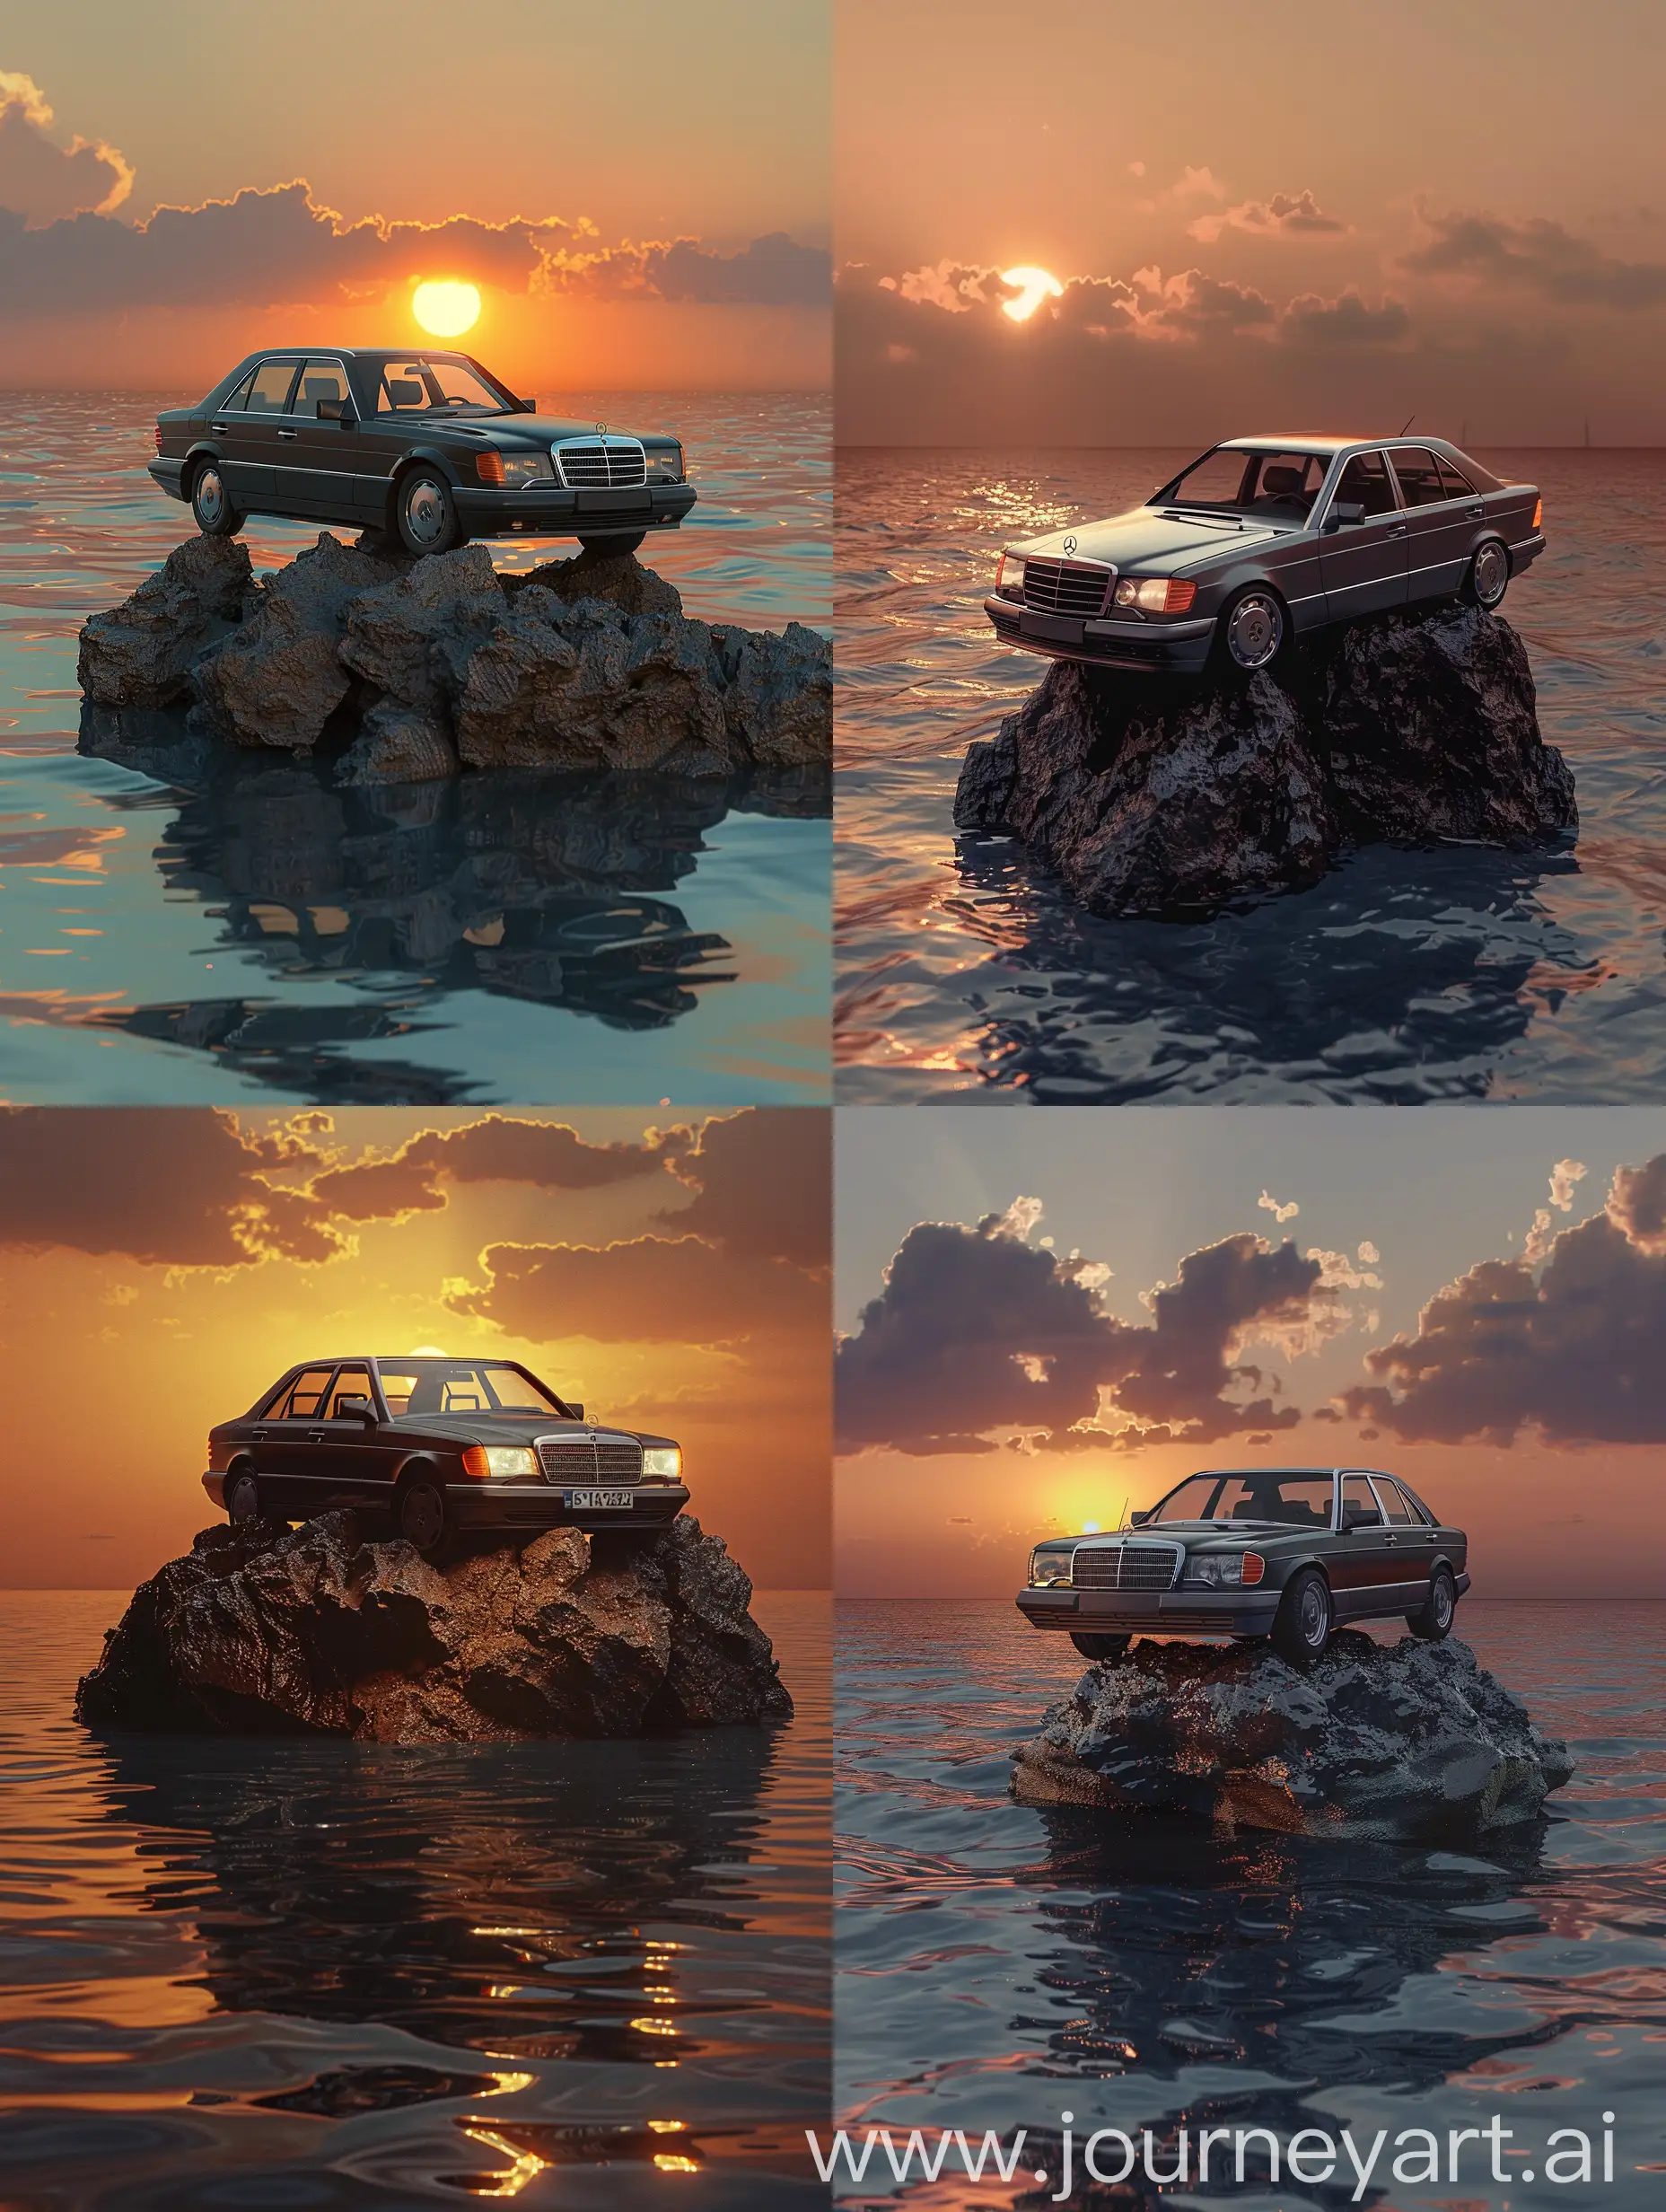 A Car on top of a very small Island In the middle of the Sea: Mercedes Benz W140 S320, Details of the Car are black and gray, Sunset, Realistic Sunlight Reflections, Extremely Details, High Quality --ar 3:4